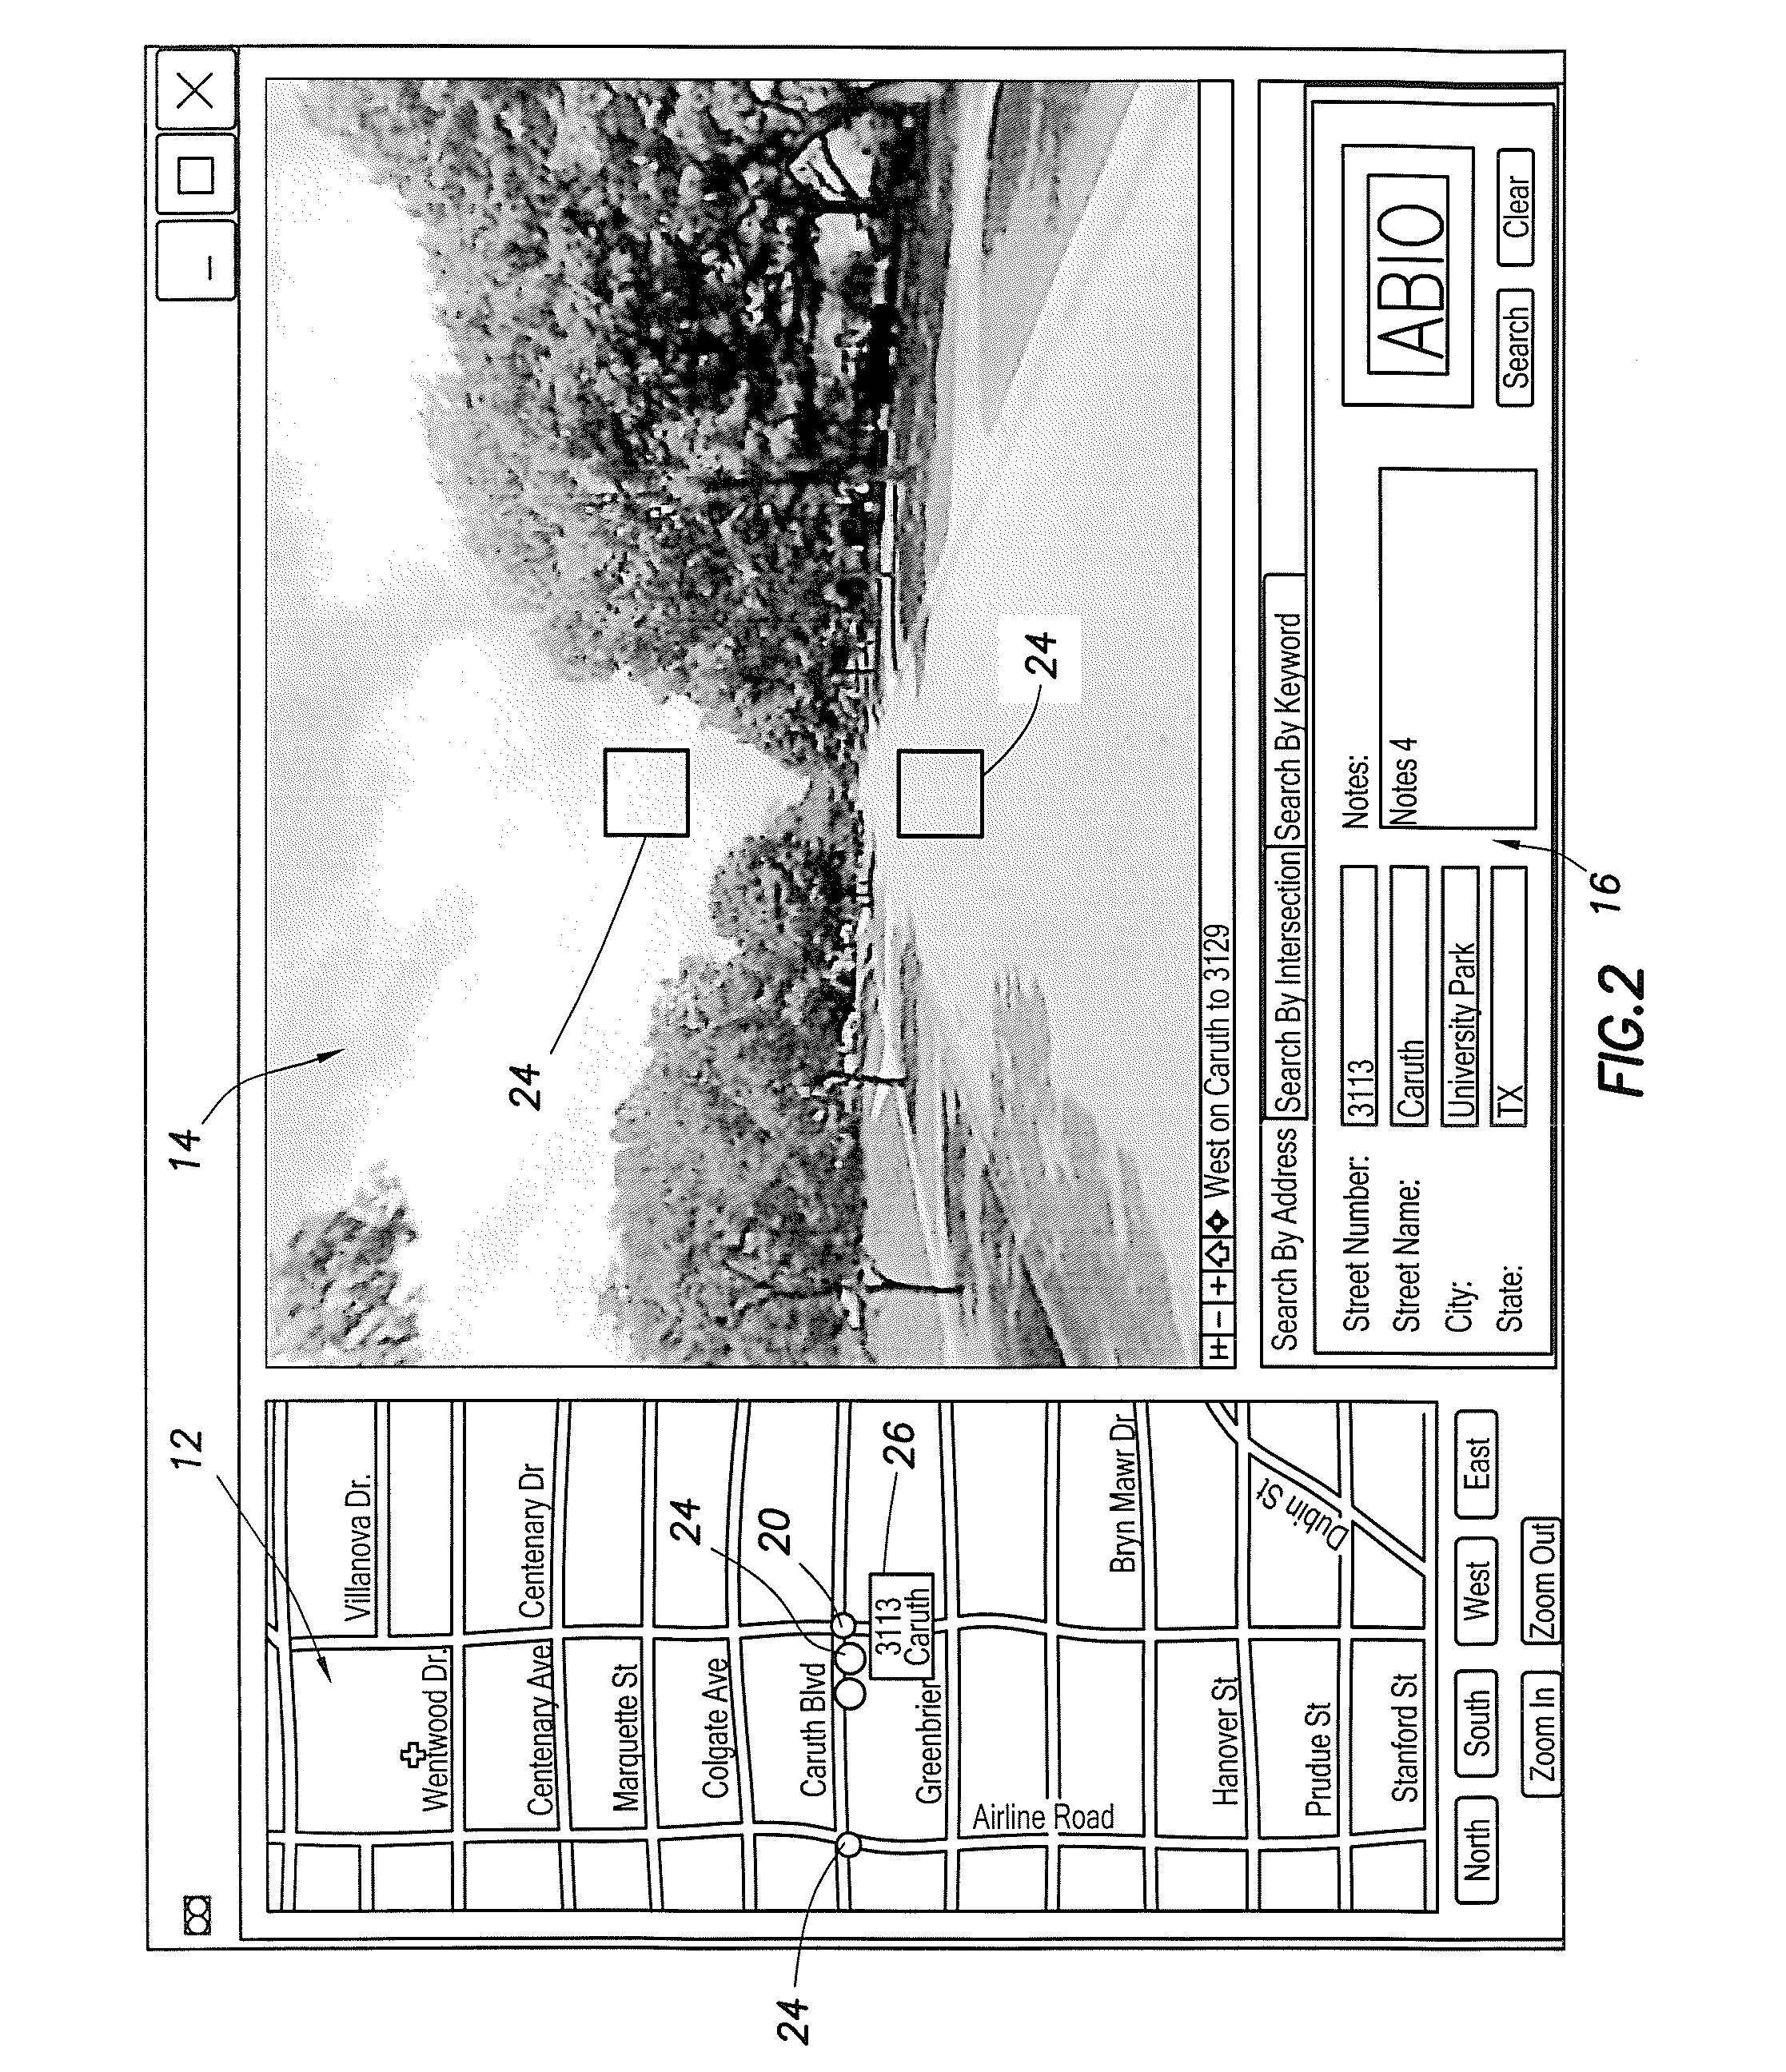 Method and apparatus for accessing multi-dimensional mapping and information